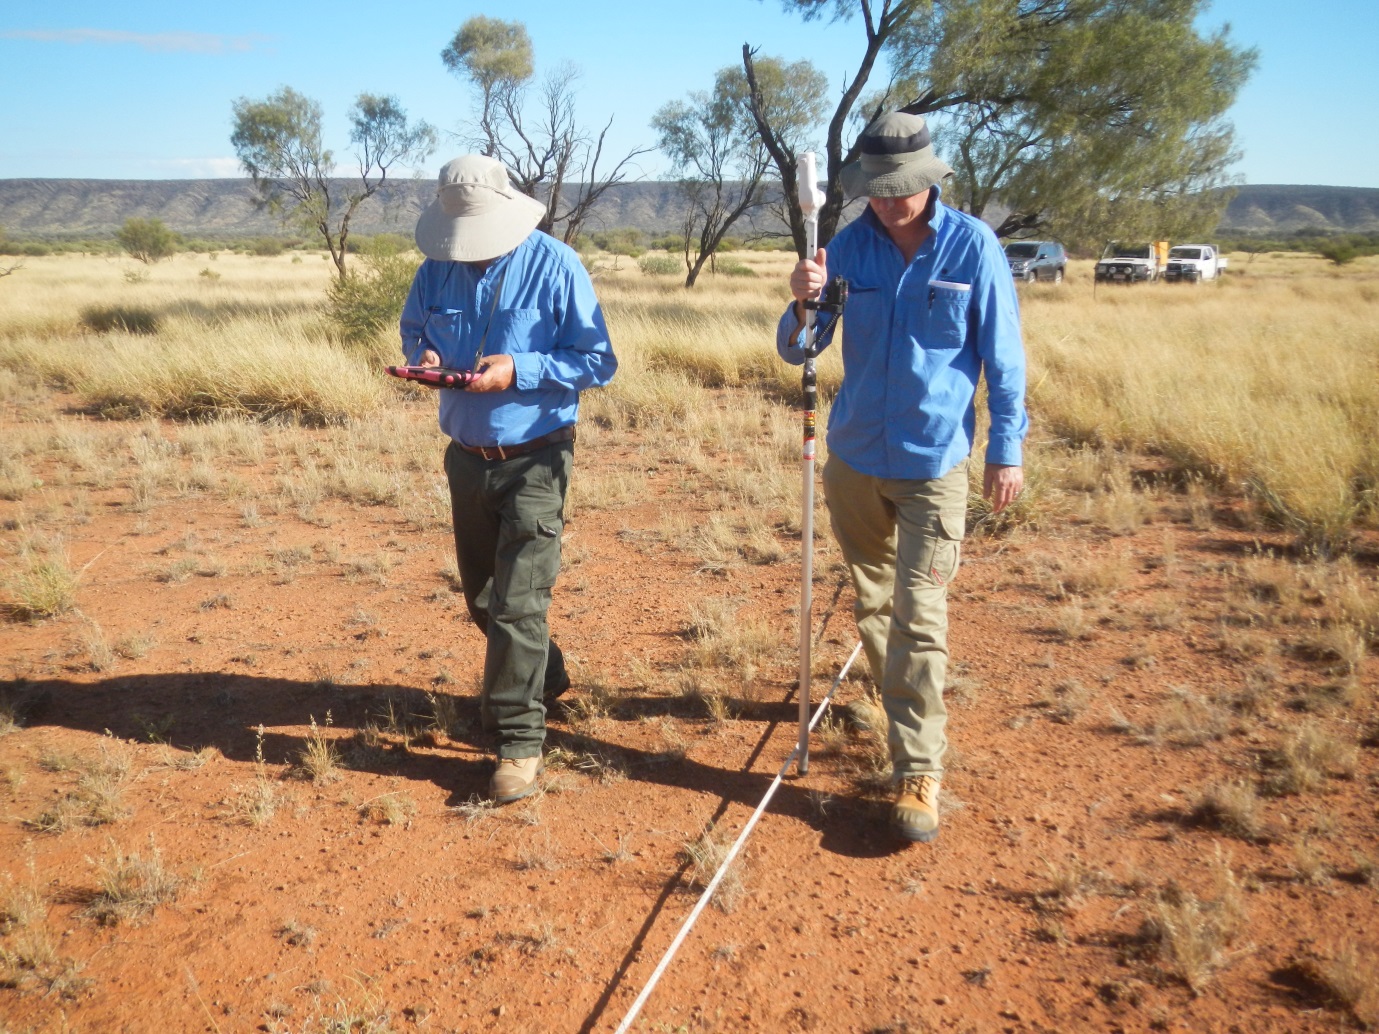 A laser pointer mounted on a pole is used to measure groundcover components at 300 points within one hectare at each measured site. Data are recorded using a tablet